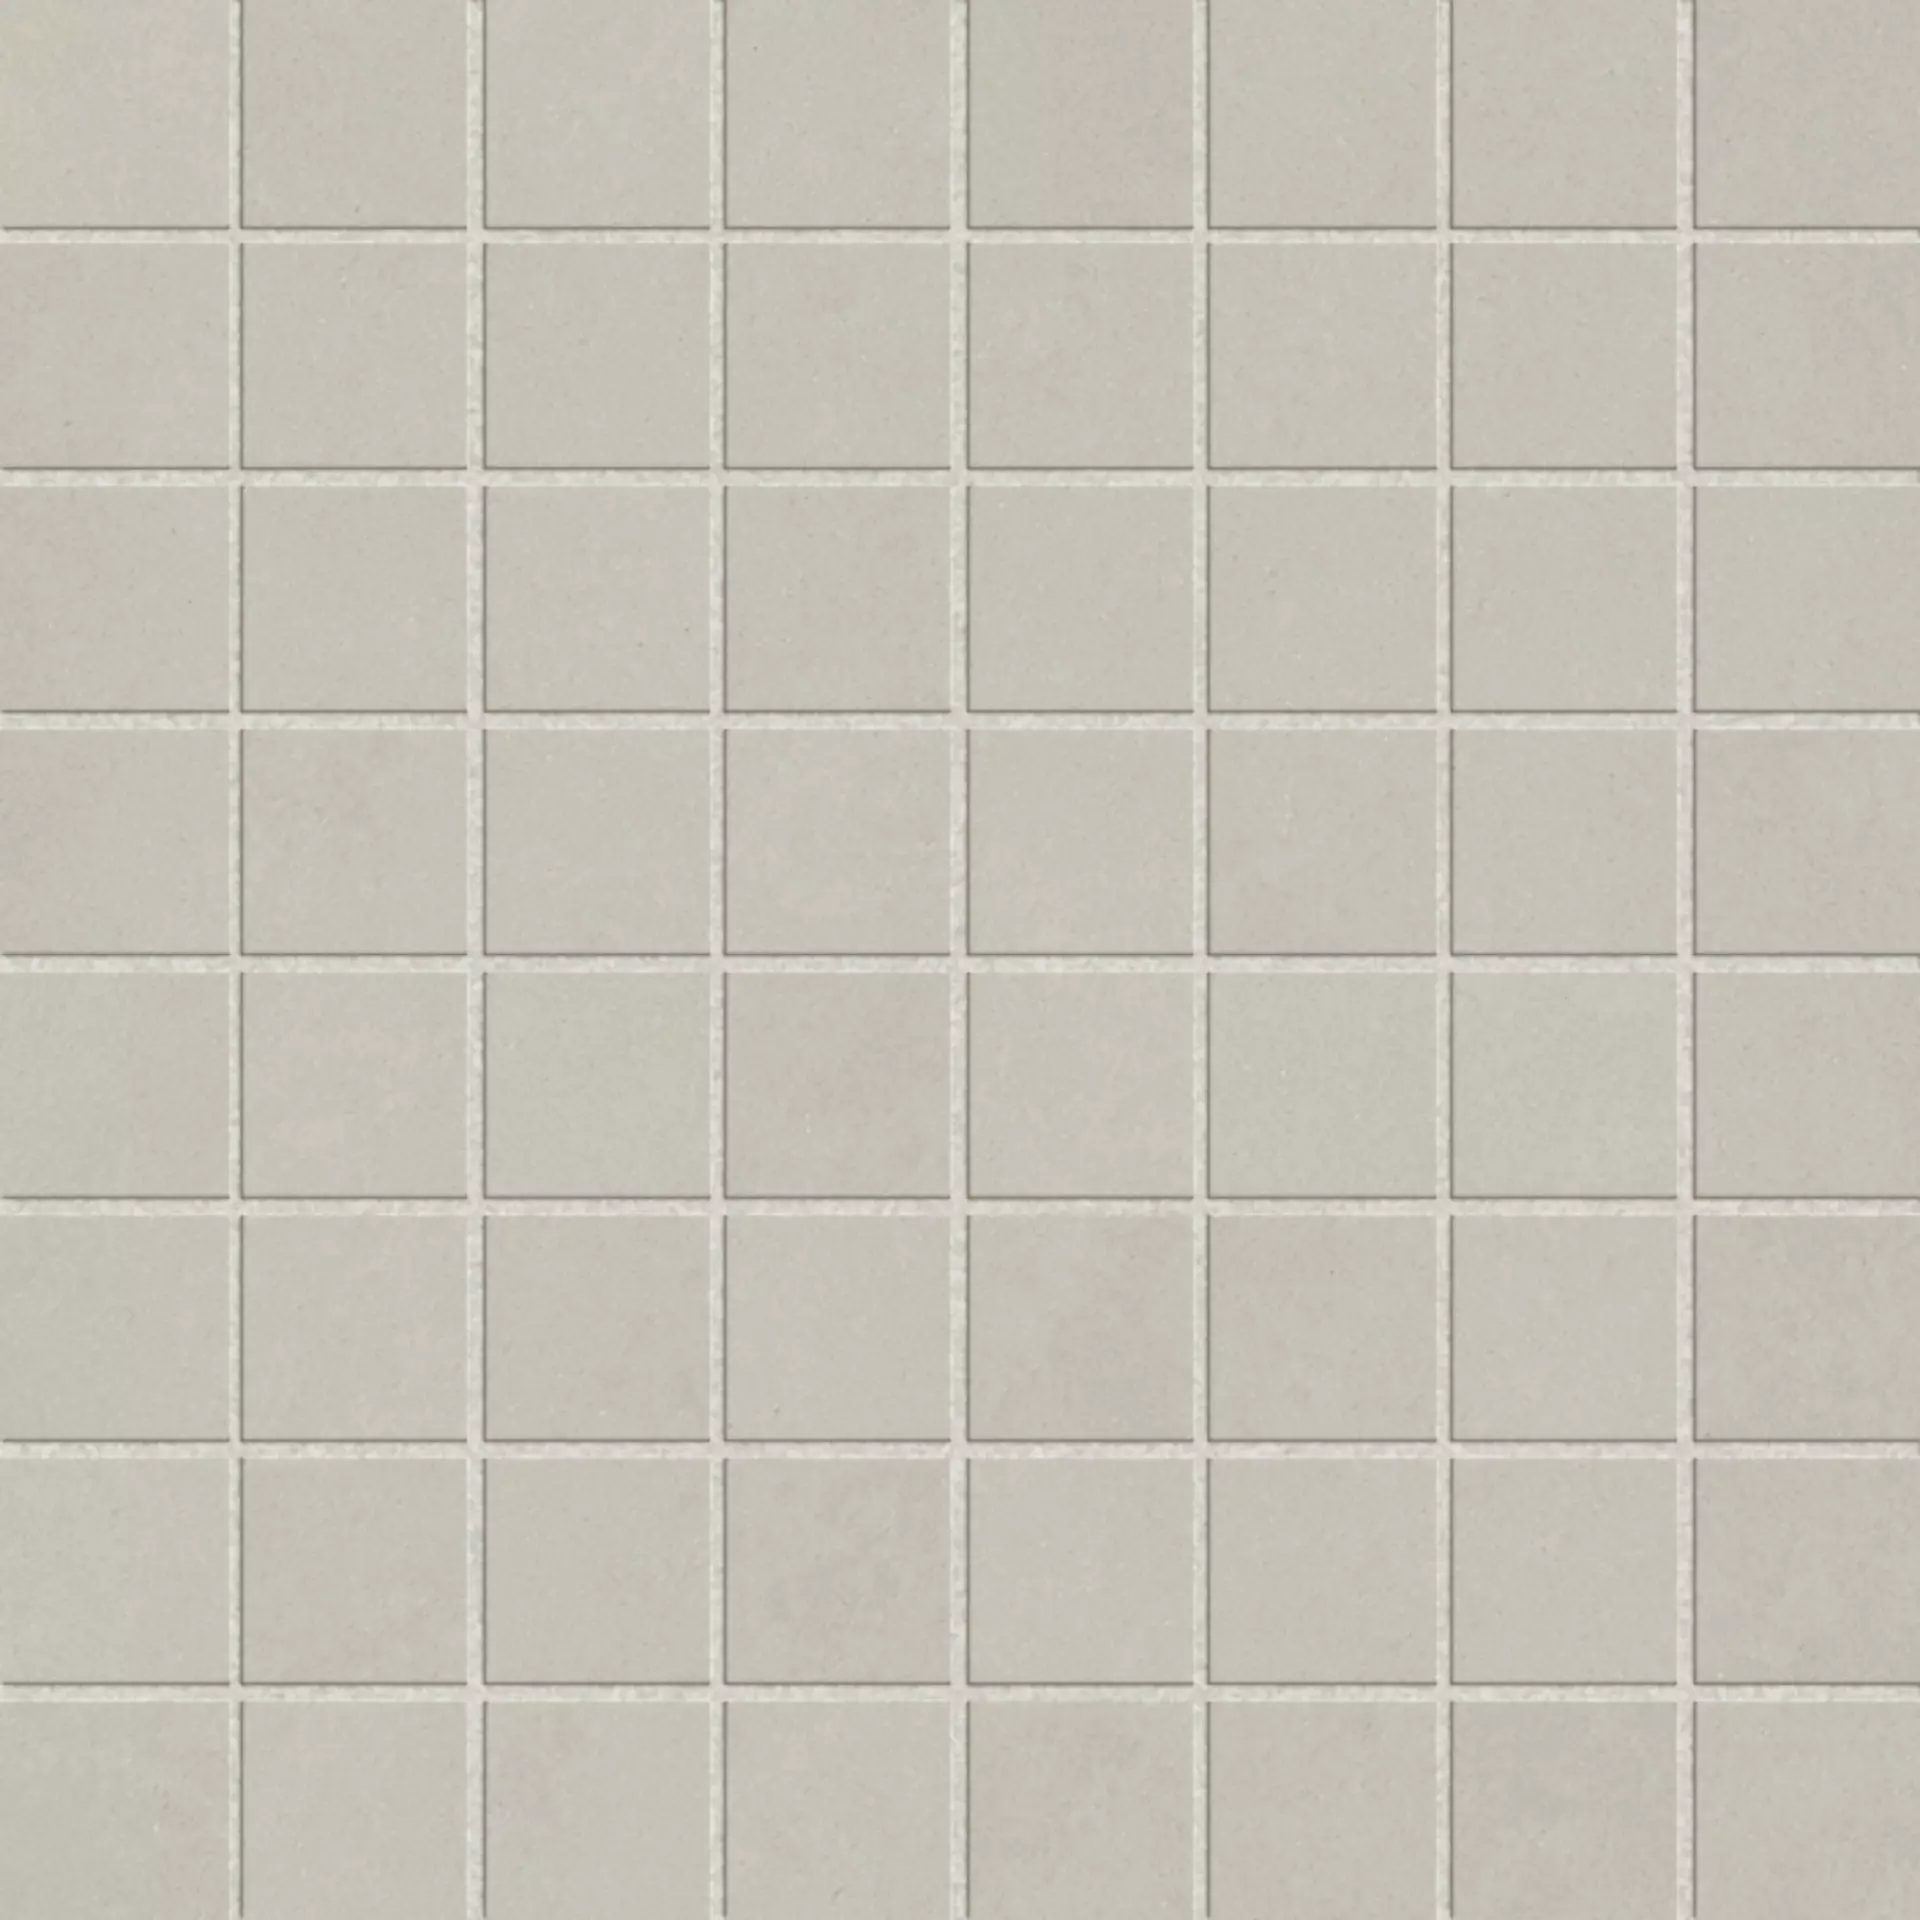 Margres Time 2.0 Silver Polished Antibacterial Mosaic 3,5x3,5 B25M33T266F 30x30cm rectified 10,5mm